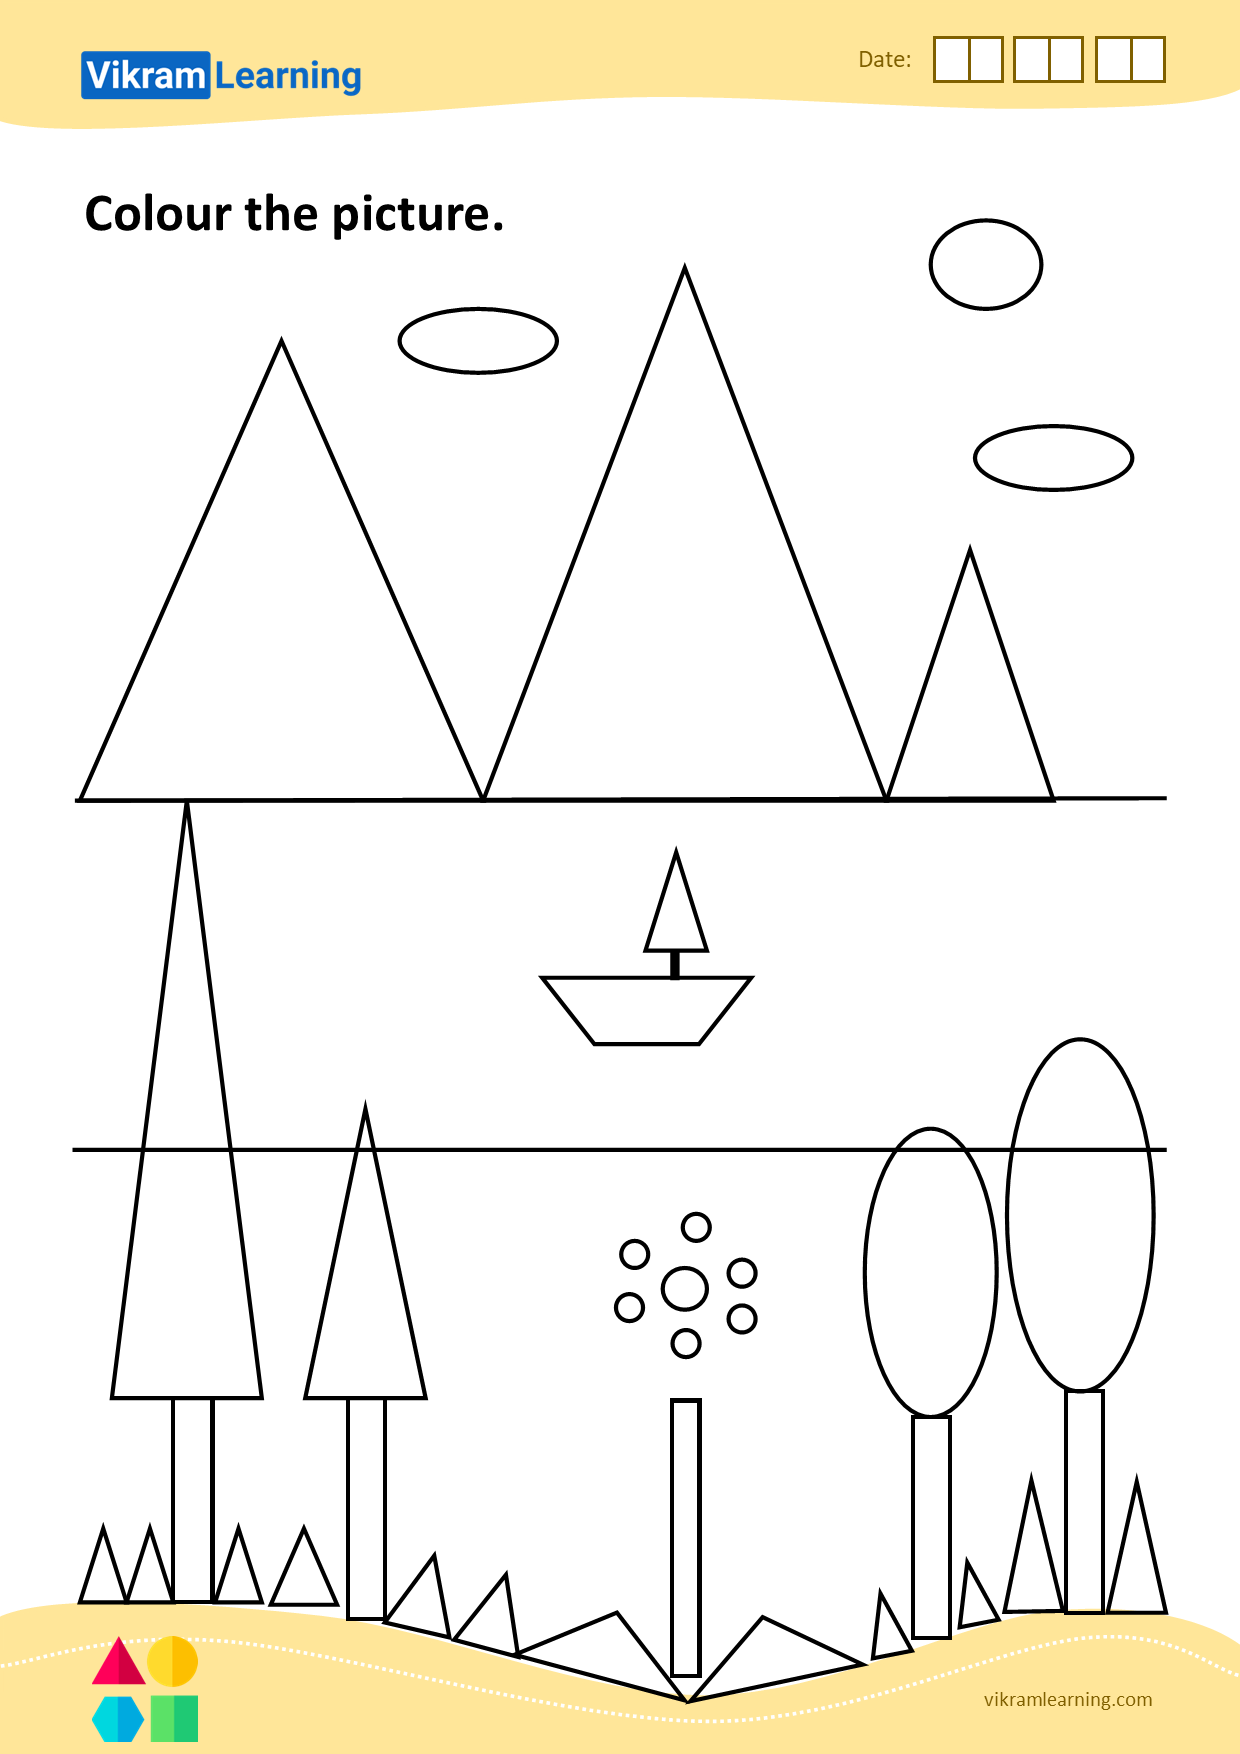 Download colour the picture worksheets